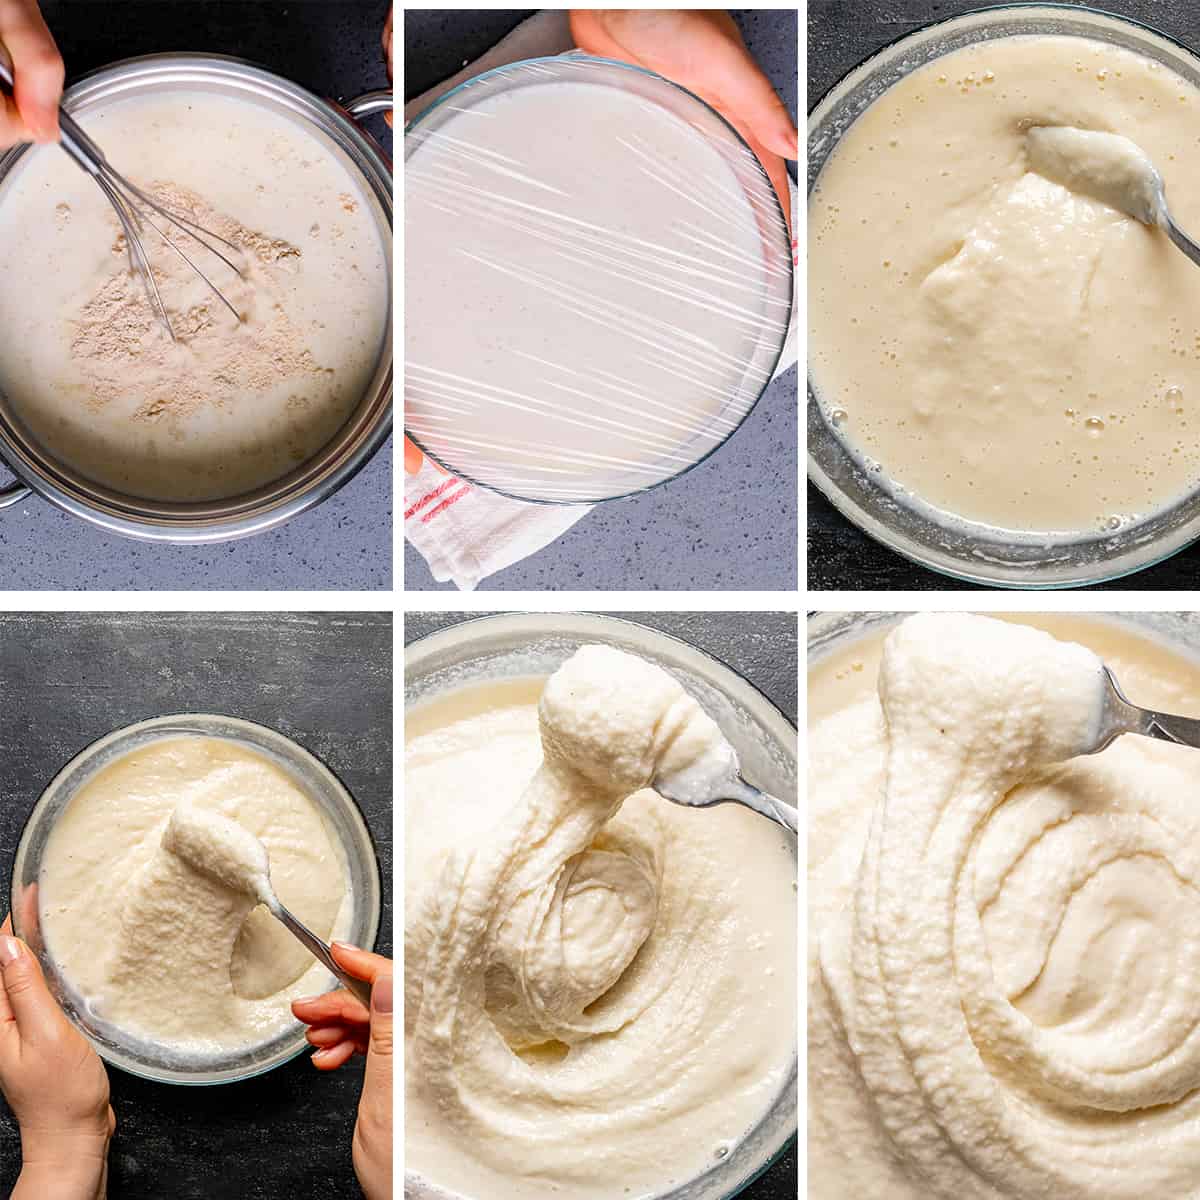 A collage of images showing how to make ice cream without an ice cream machine.